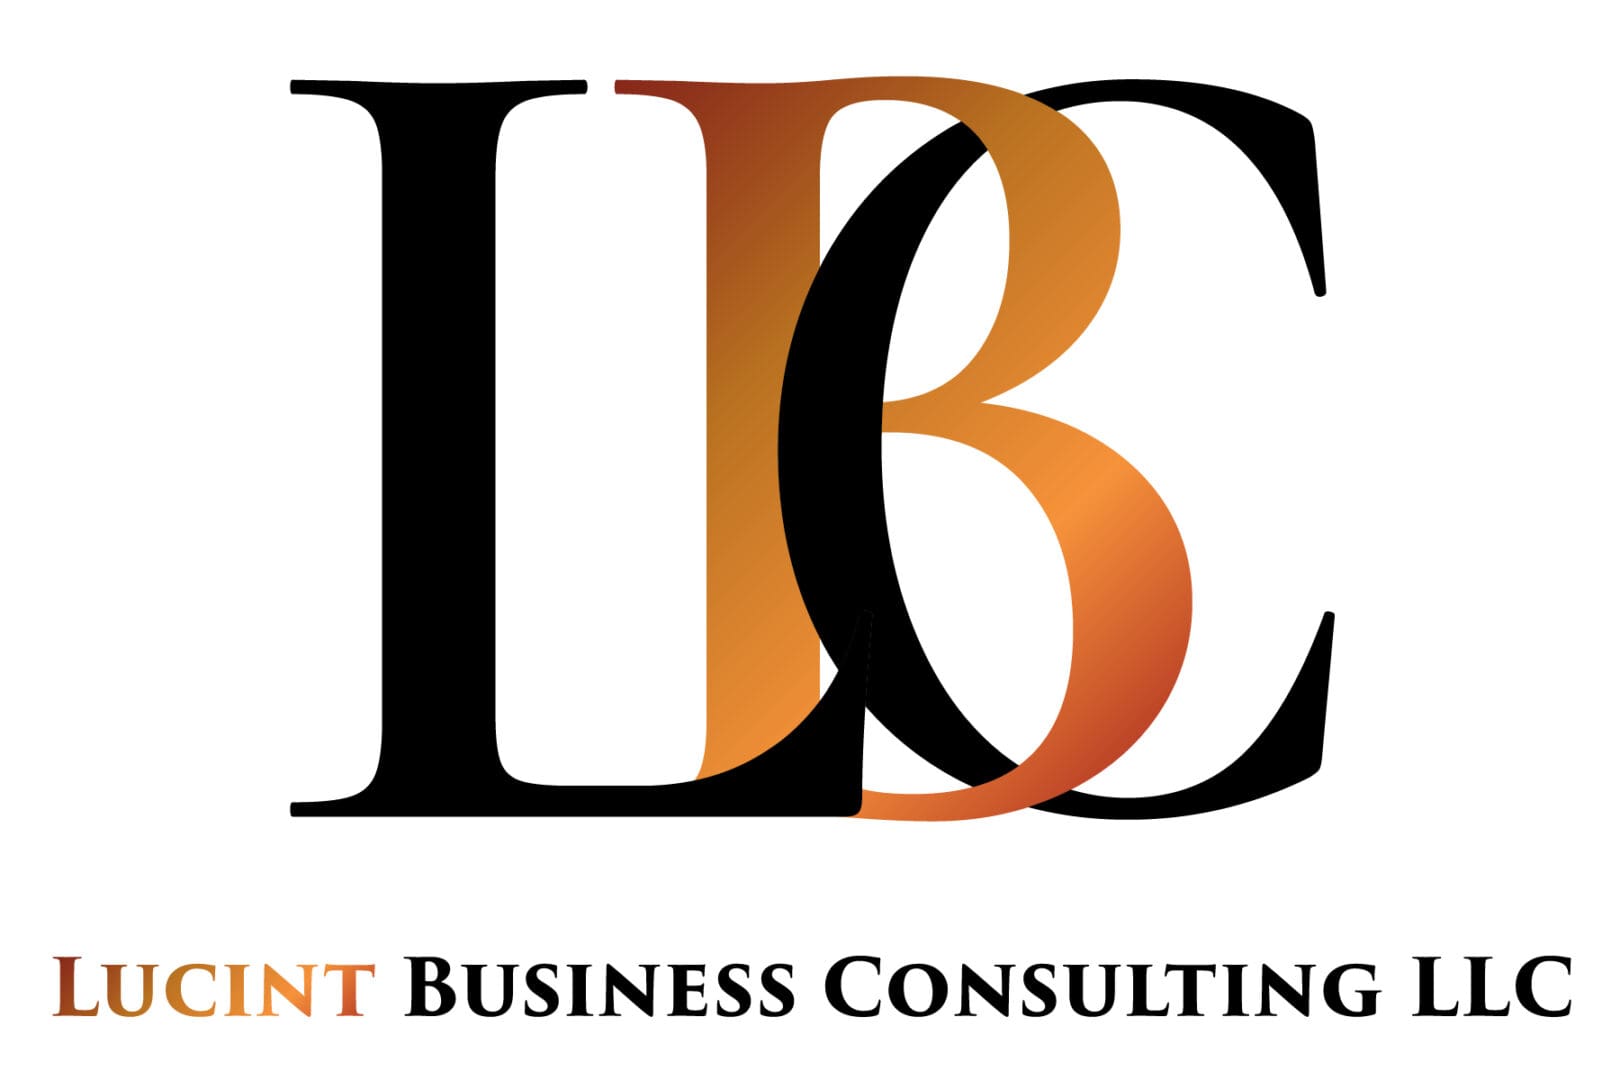 A logo of the company, lucent business consulting.